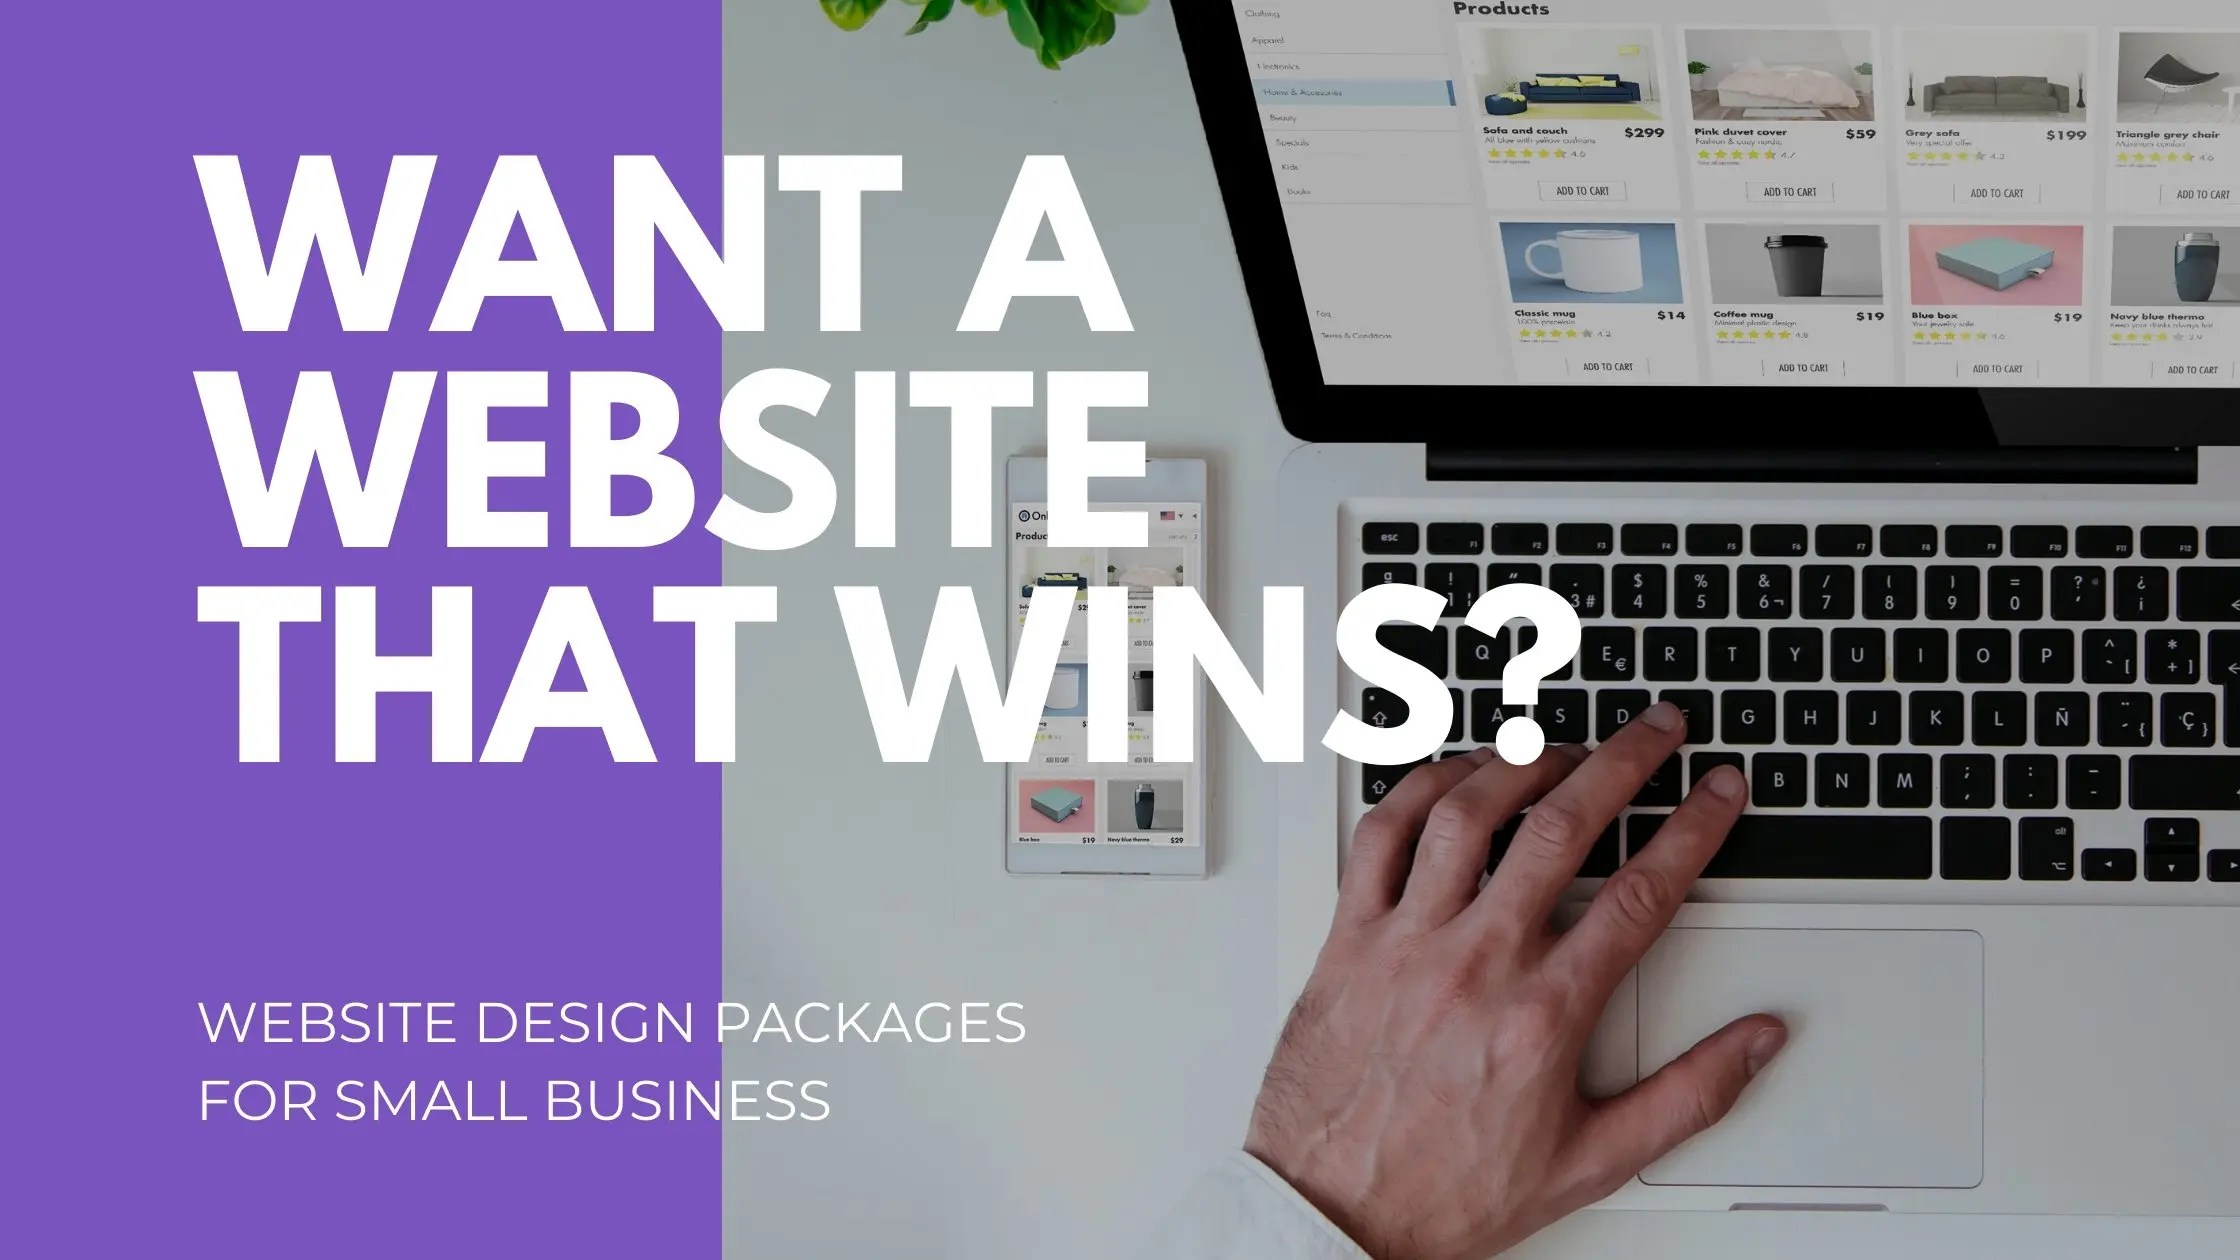 Create Your Own Website For Small Business